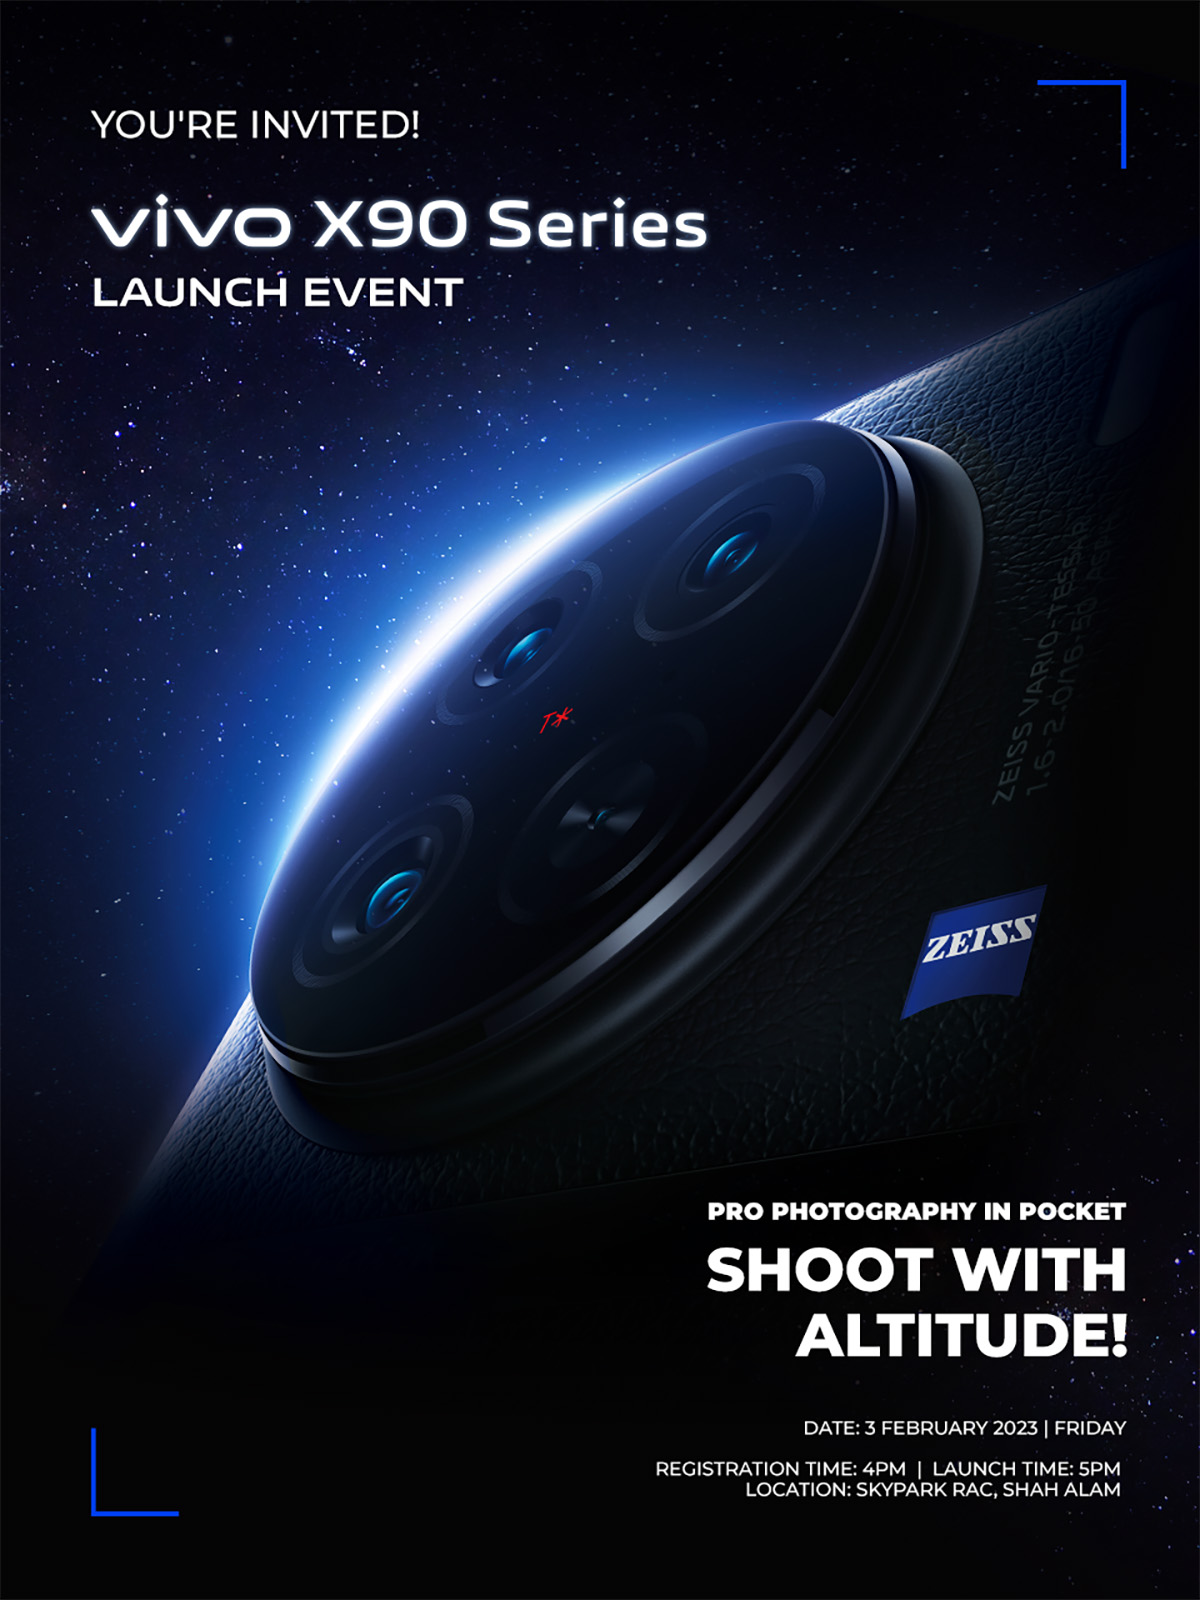 vivo X90 Series Confirmed Launching In Malaysia On 3 February 2023 - Lowyat.net (Picture 5)